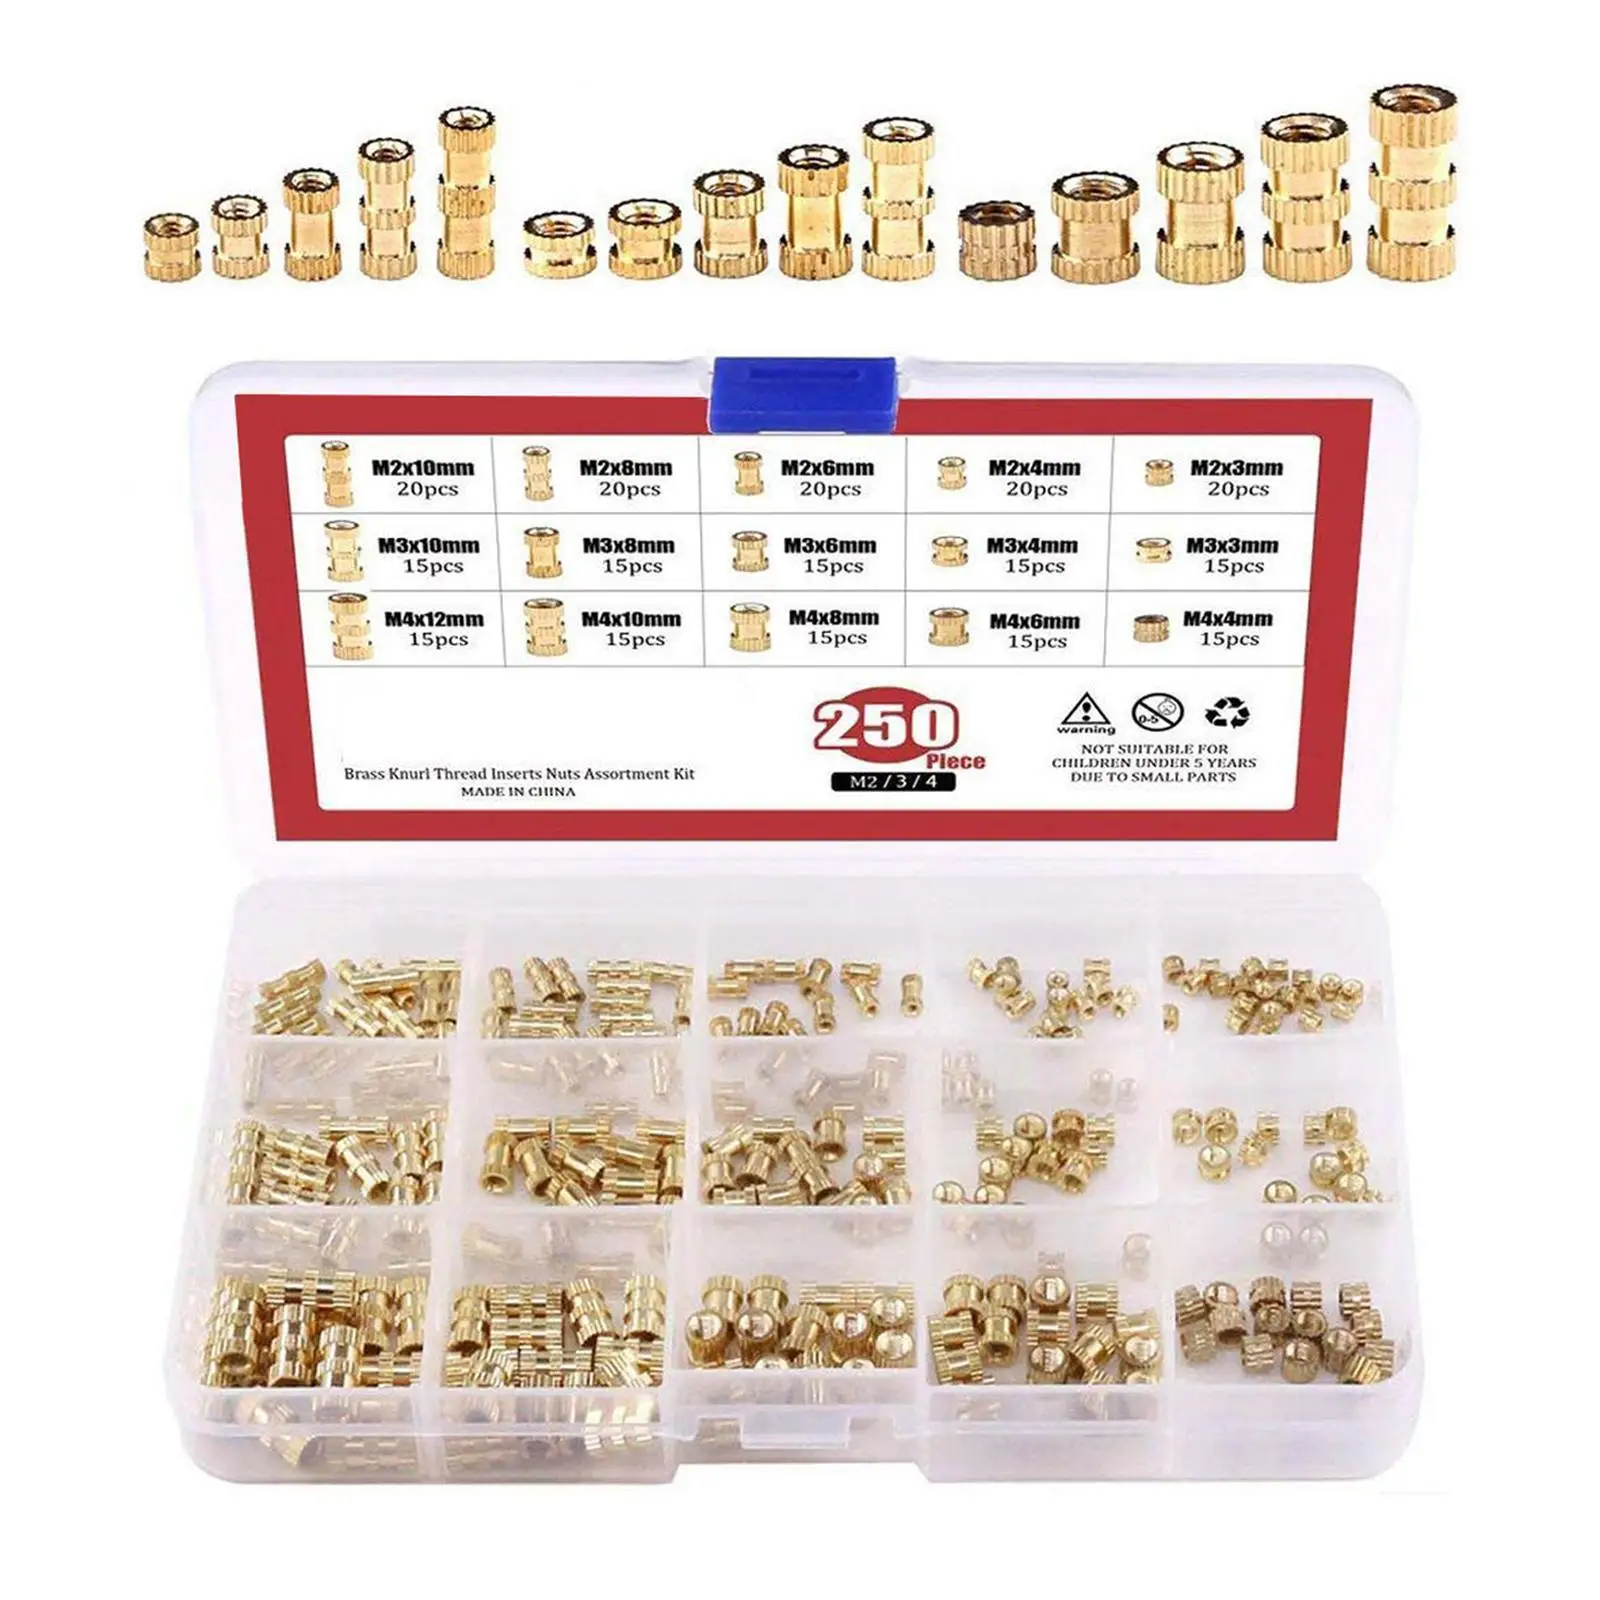 250 x Brass Knurled Threaded Insert Embedment Nuts Assortment for 3D Printing